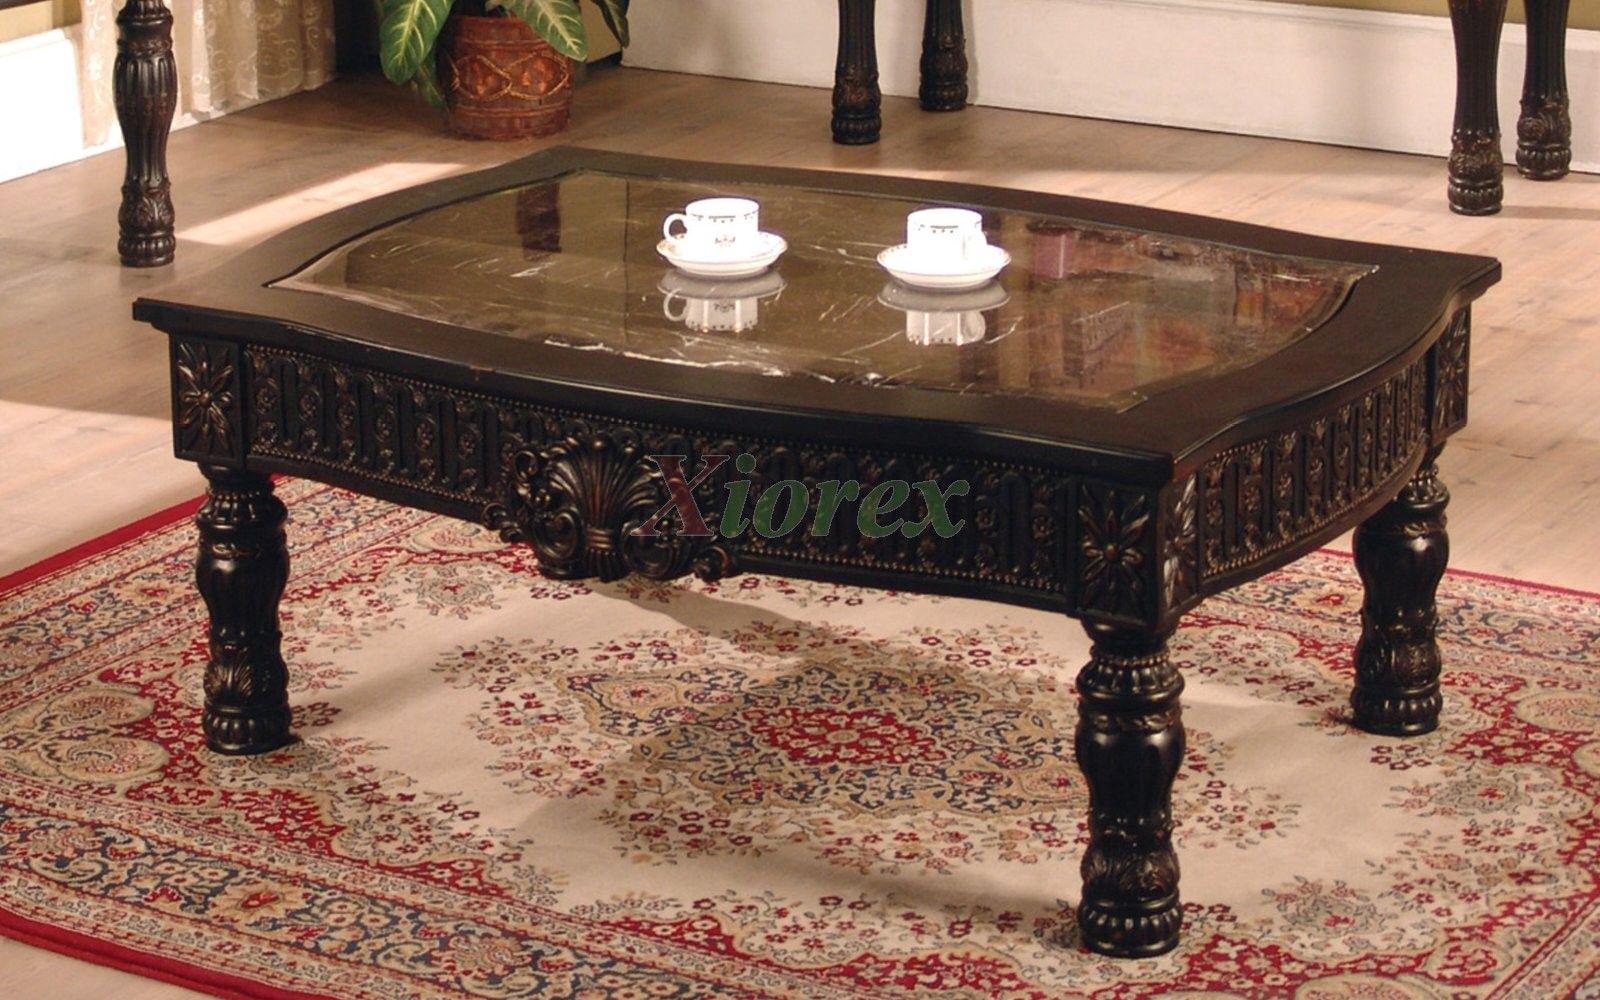 Ajax Rectangle Coffee Table With Faux Marble Top Inlay | Xiorex Pertaining To Faux Marble Top Coffee Tables (View 16 of 20)